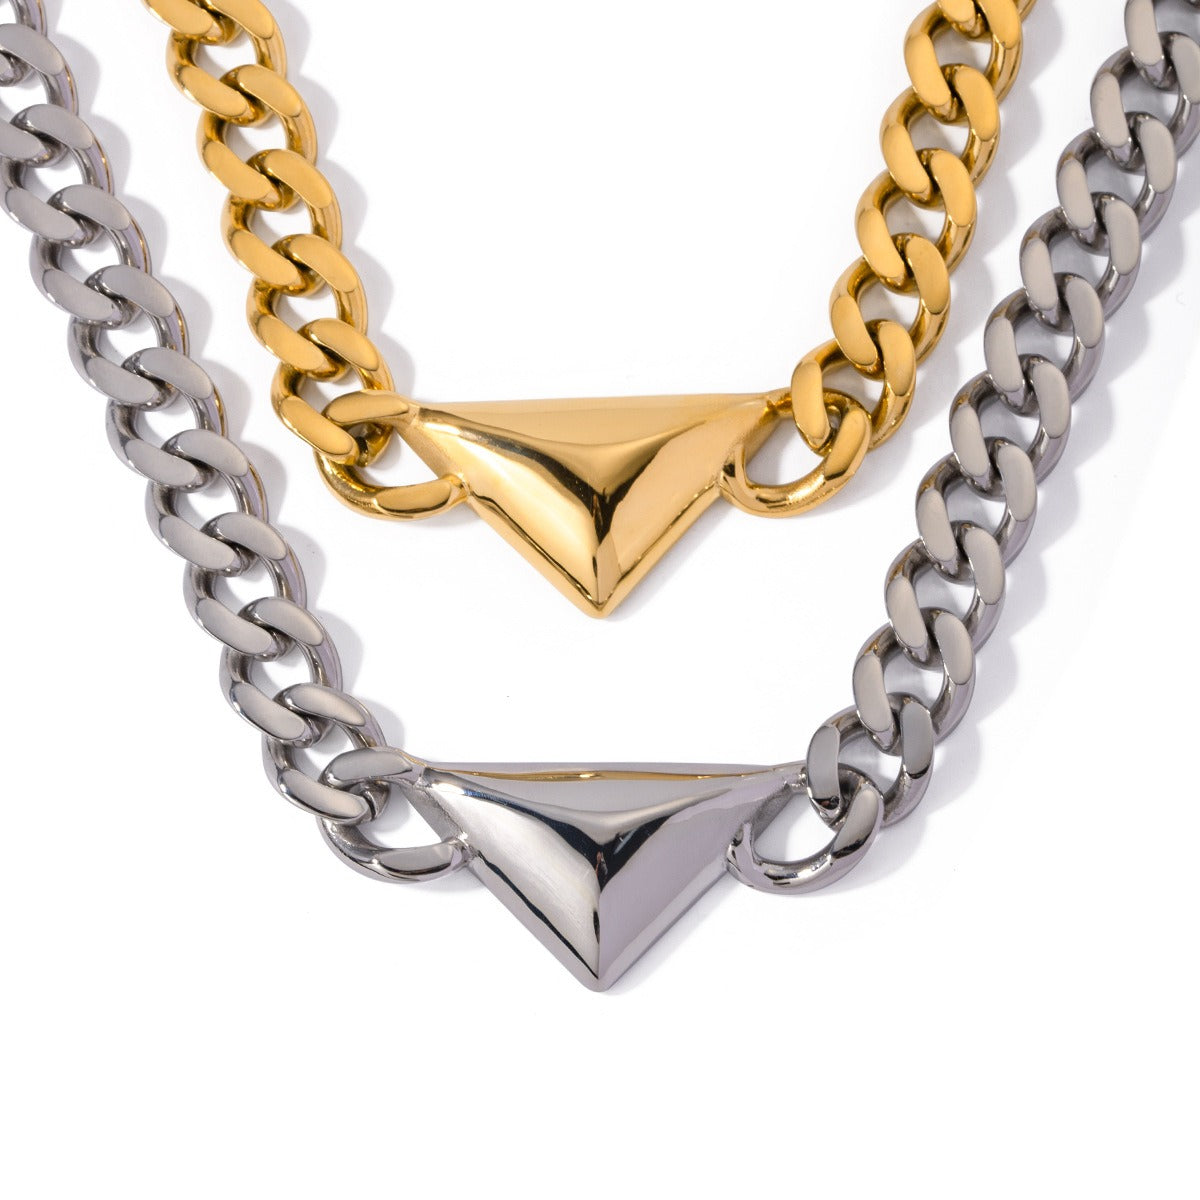 18k gold exaggerated triangle design necklace with Cuban chain